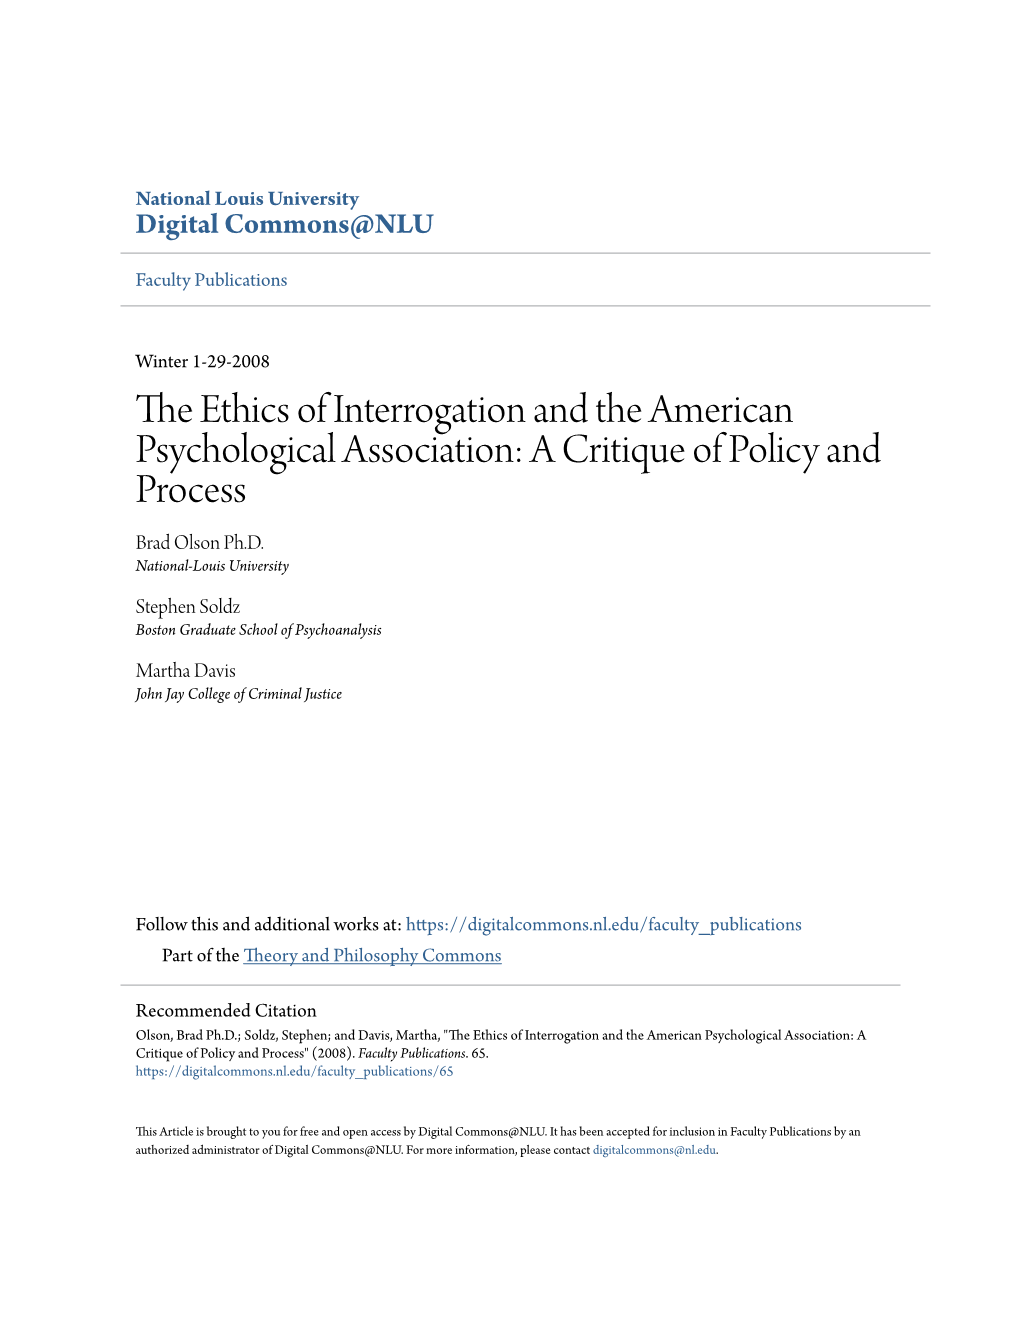 The Ethics of Interrogation and the American Psychological Association: a Critique of Policy and Process Brad Olson*1, Stephen Soldz2 and Martha Davis3